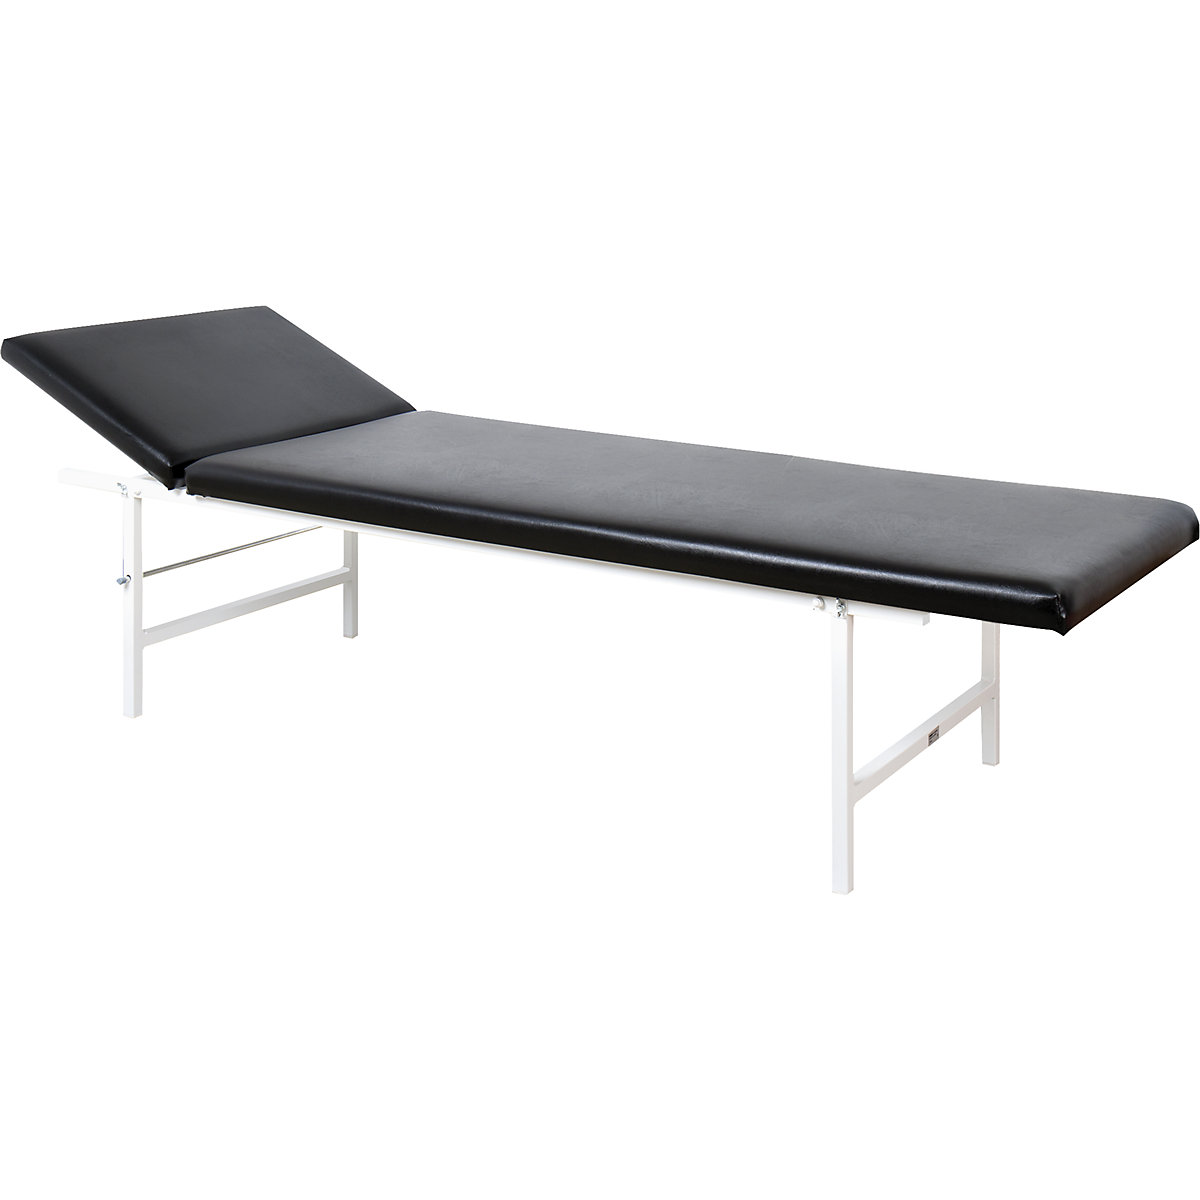 SÖHNGEN – First-aid room couch, adjustable head piece, black fabric covering